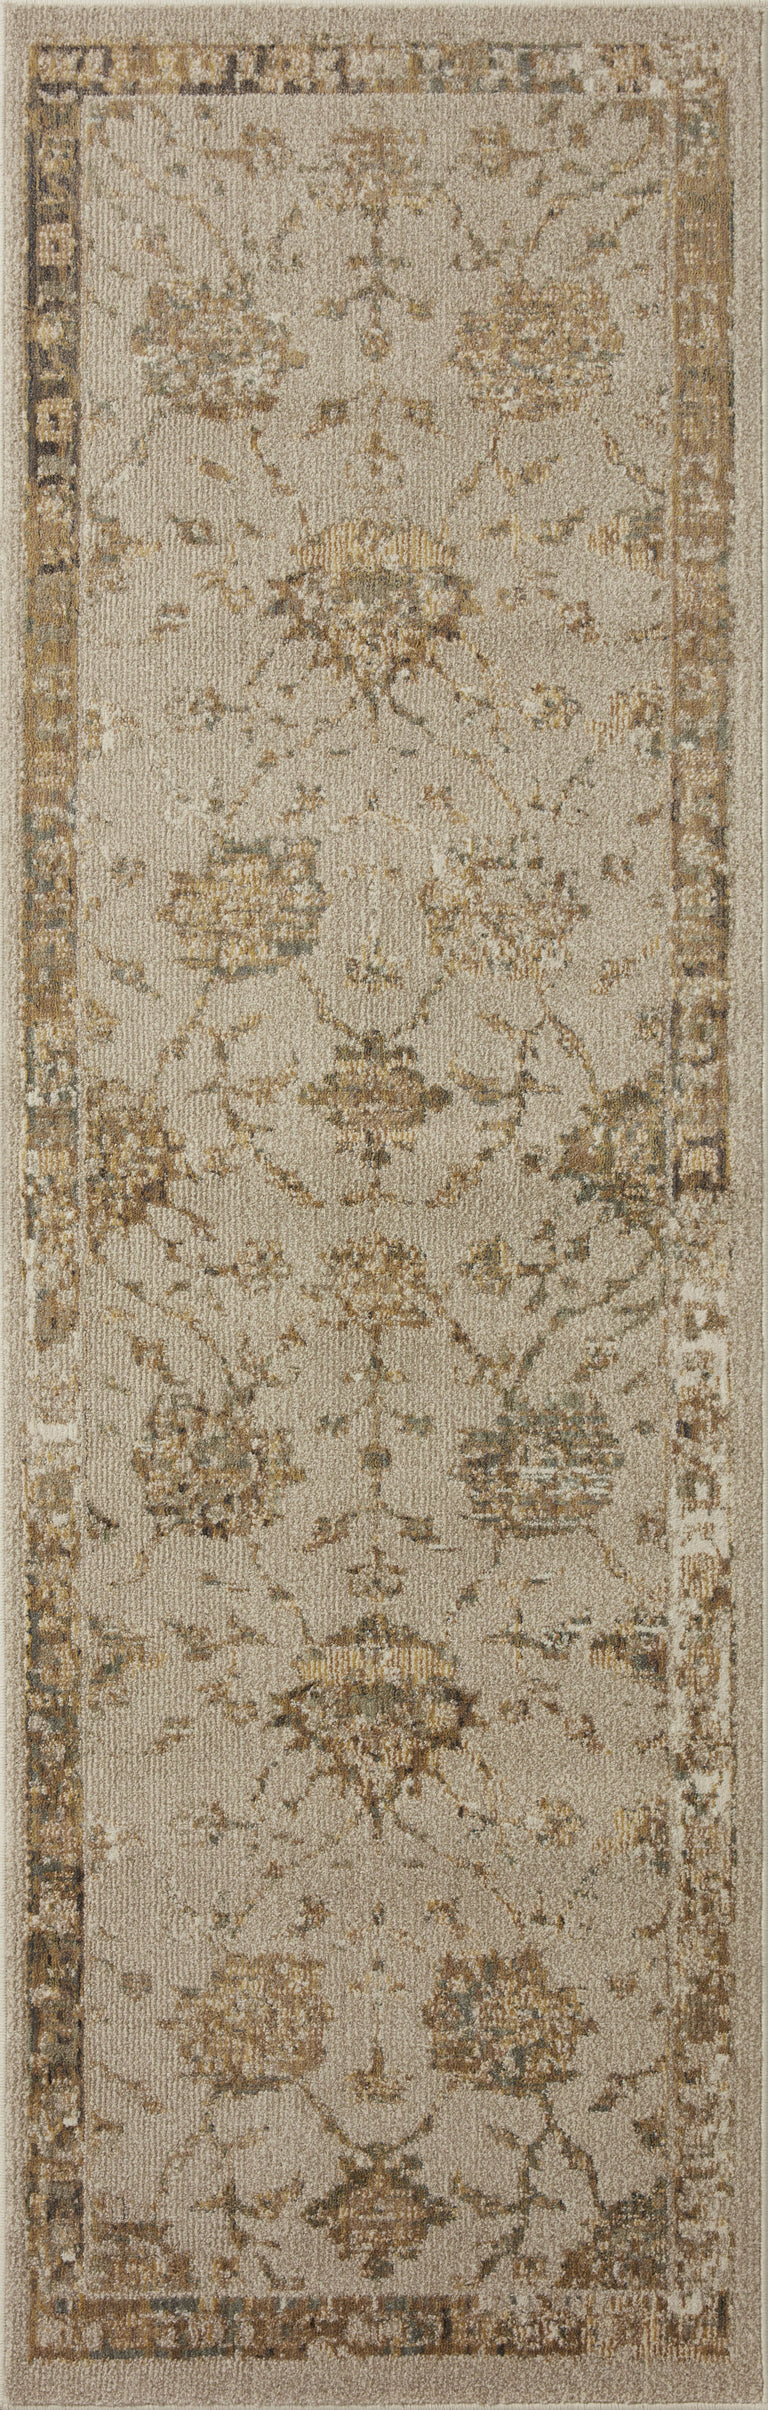 Loloi Rugs Giada Collection Rug in Silver Sage - 10'0" x 14'0"